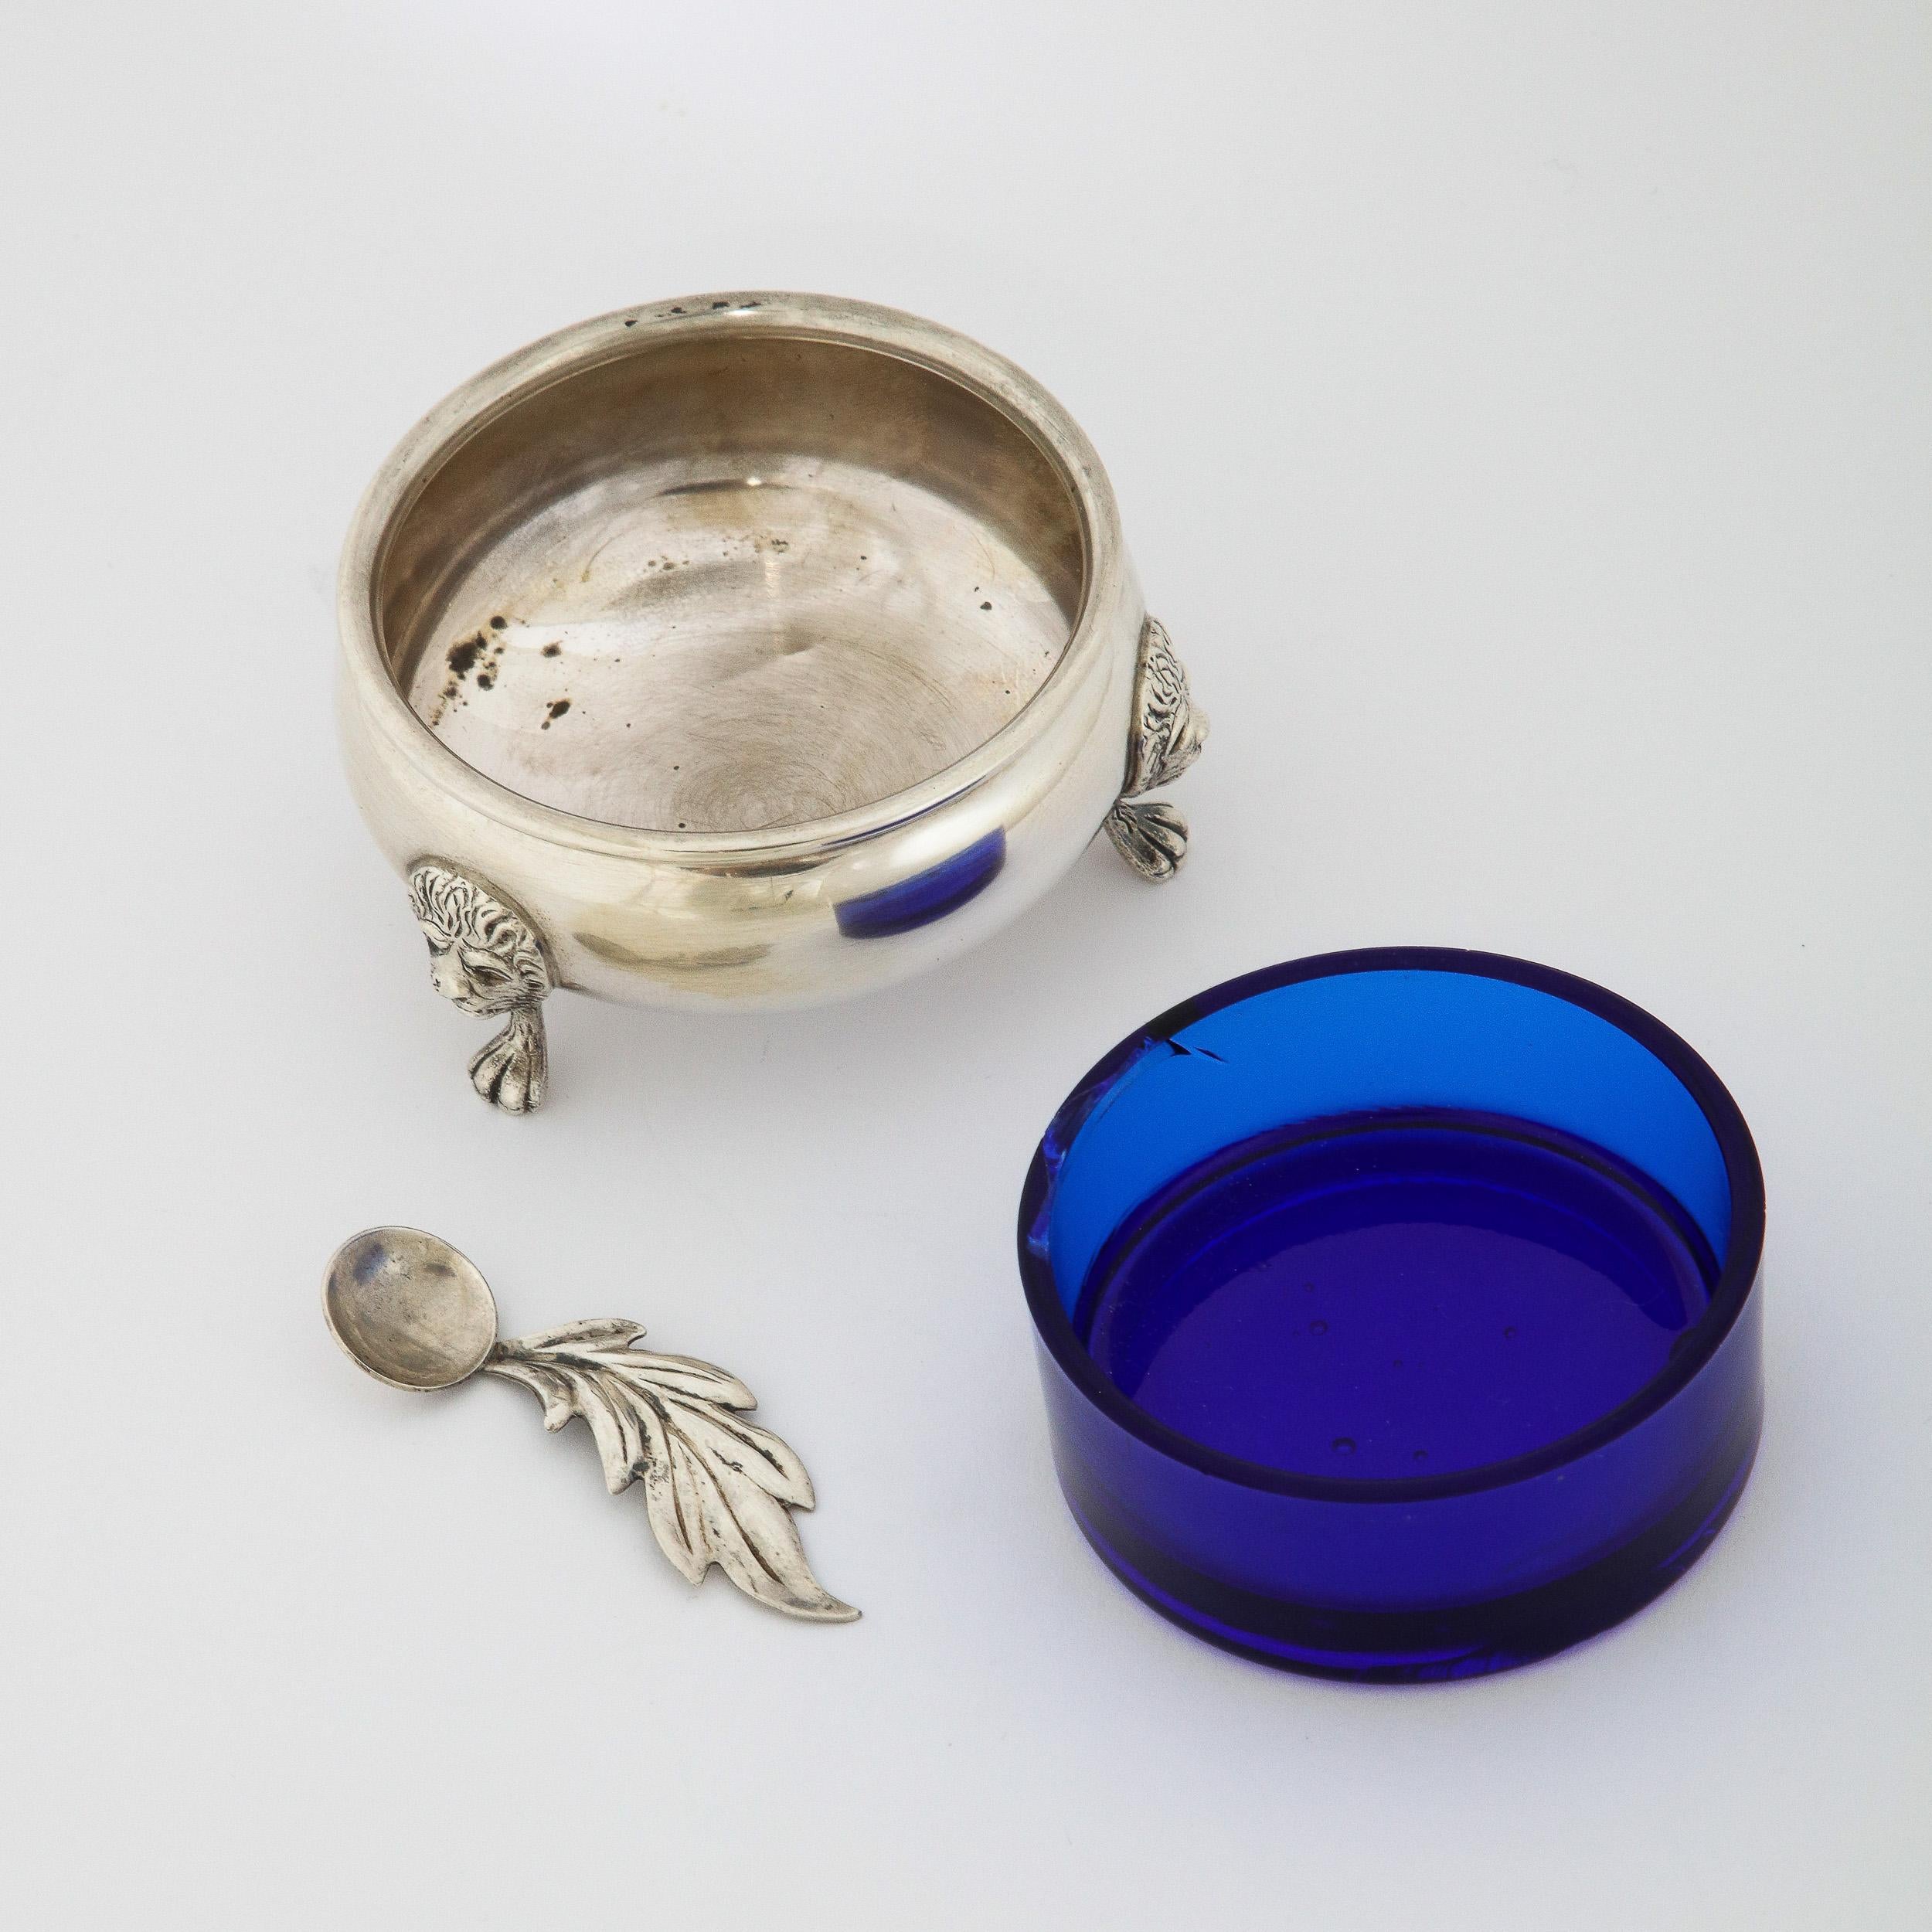 Mid-20th Century Elegant Sterling Silver Salt Cellar by Aniston with Lion and Paw Feet